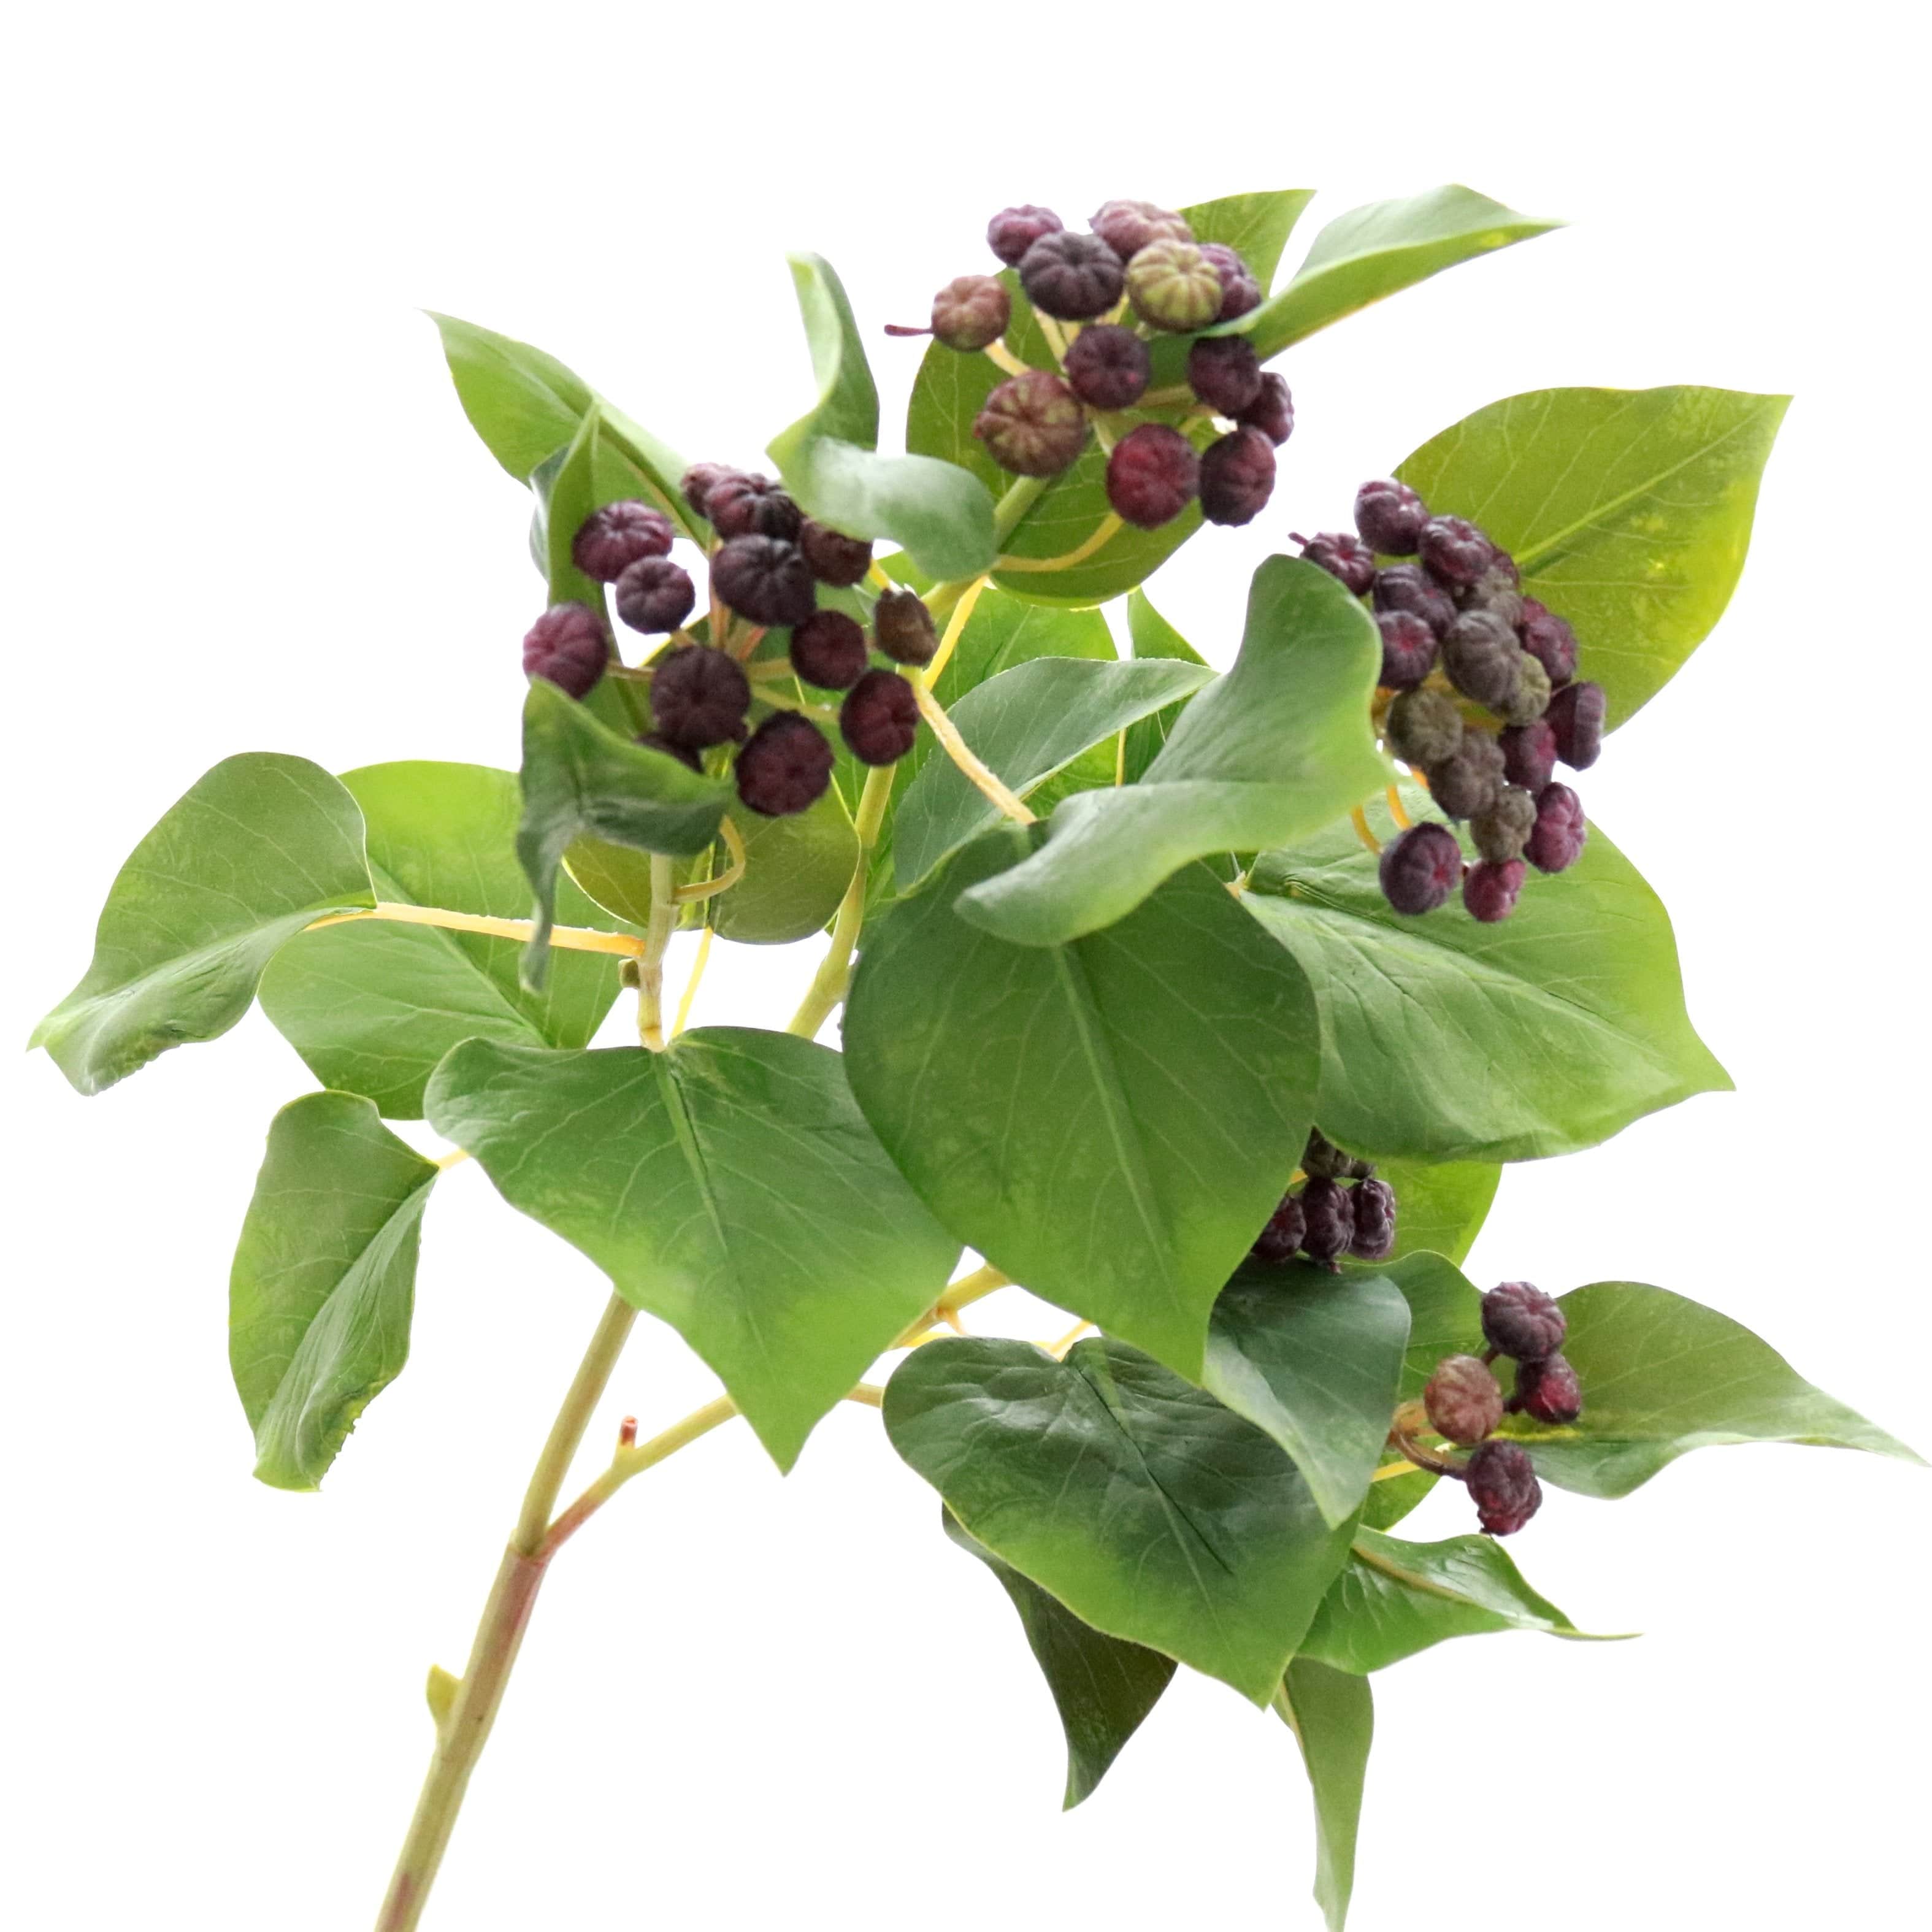 Artificial ivy with realistic purple berries, This faux ivy doesn't look like fake ivy with shiny leaves shaped just like real ivy